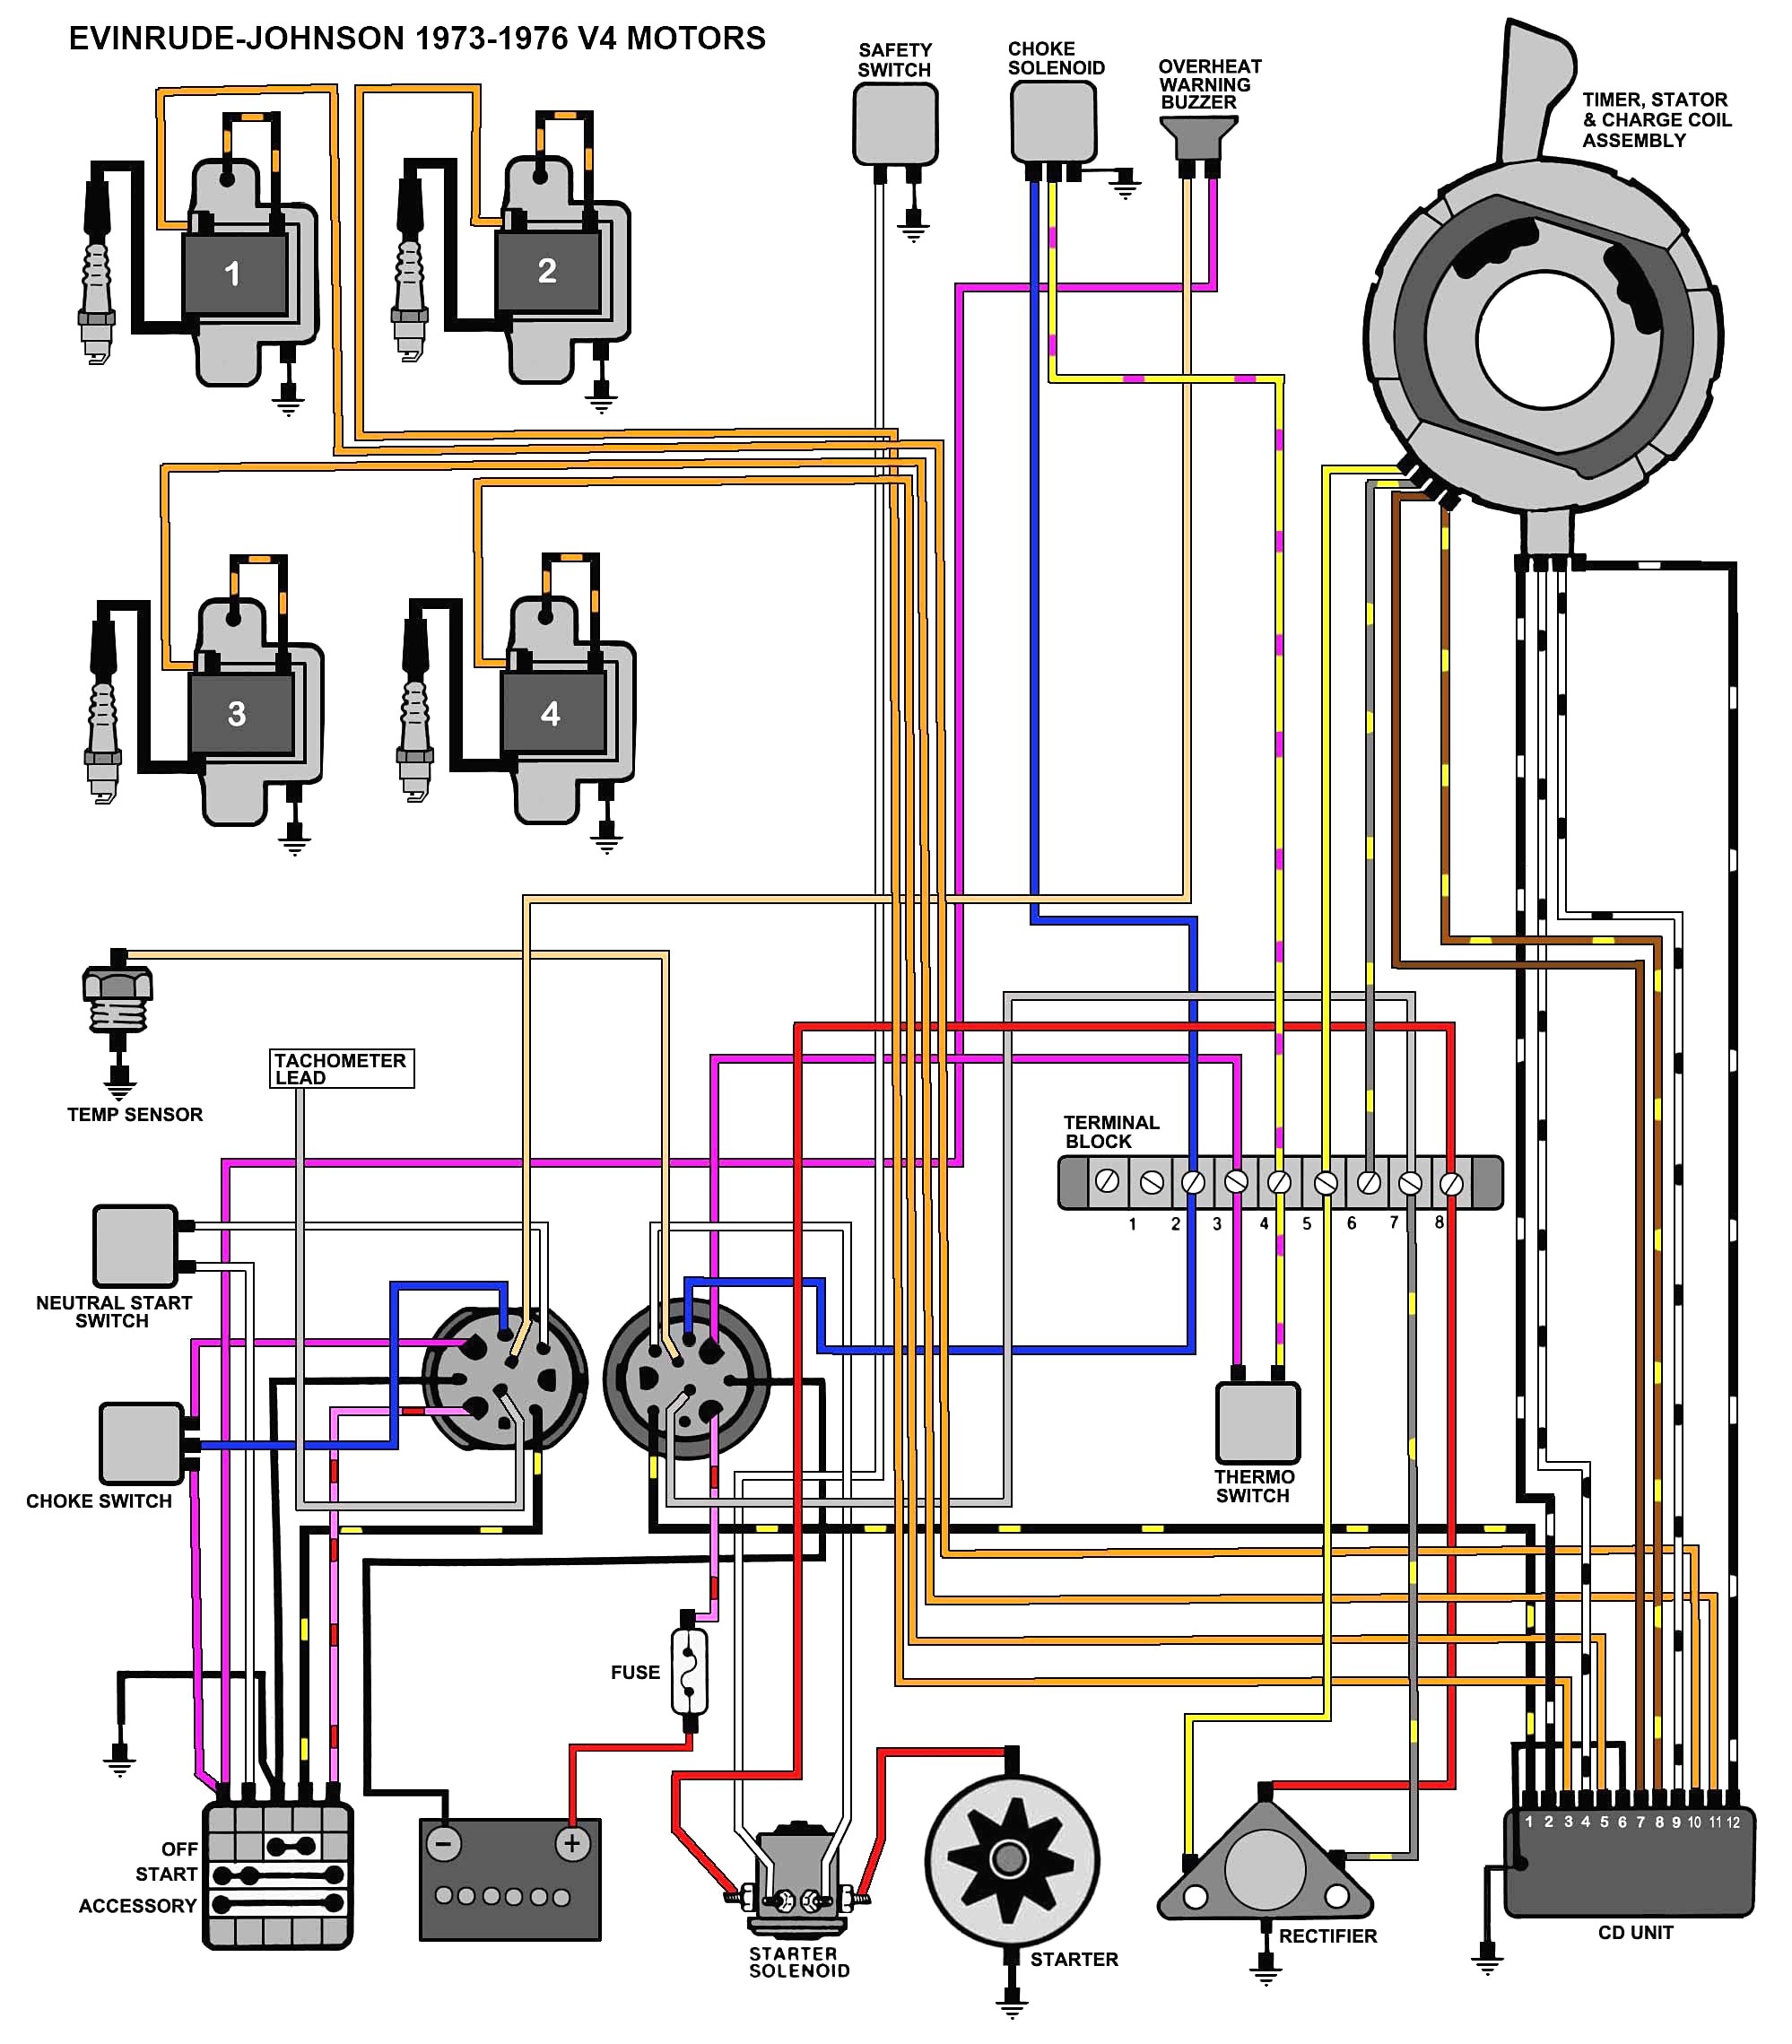 mastertech marine at evinrude ignition switch wiring diagram and omc solenoid wiring diagram evinrude ignition switch